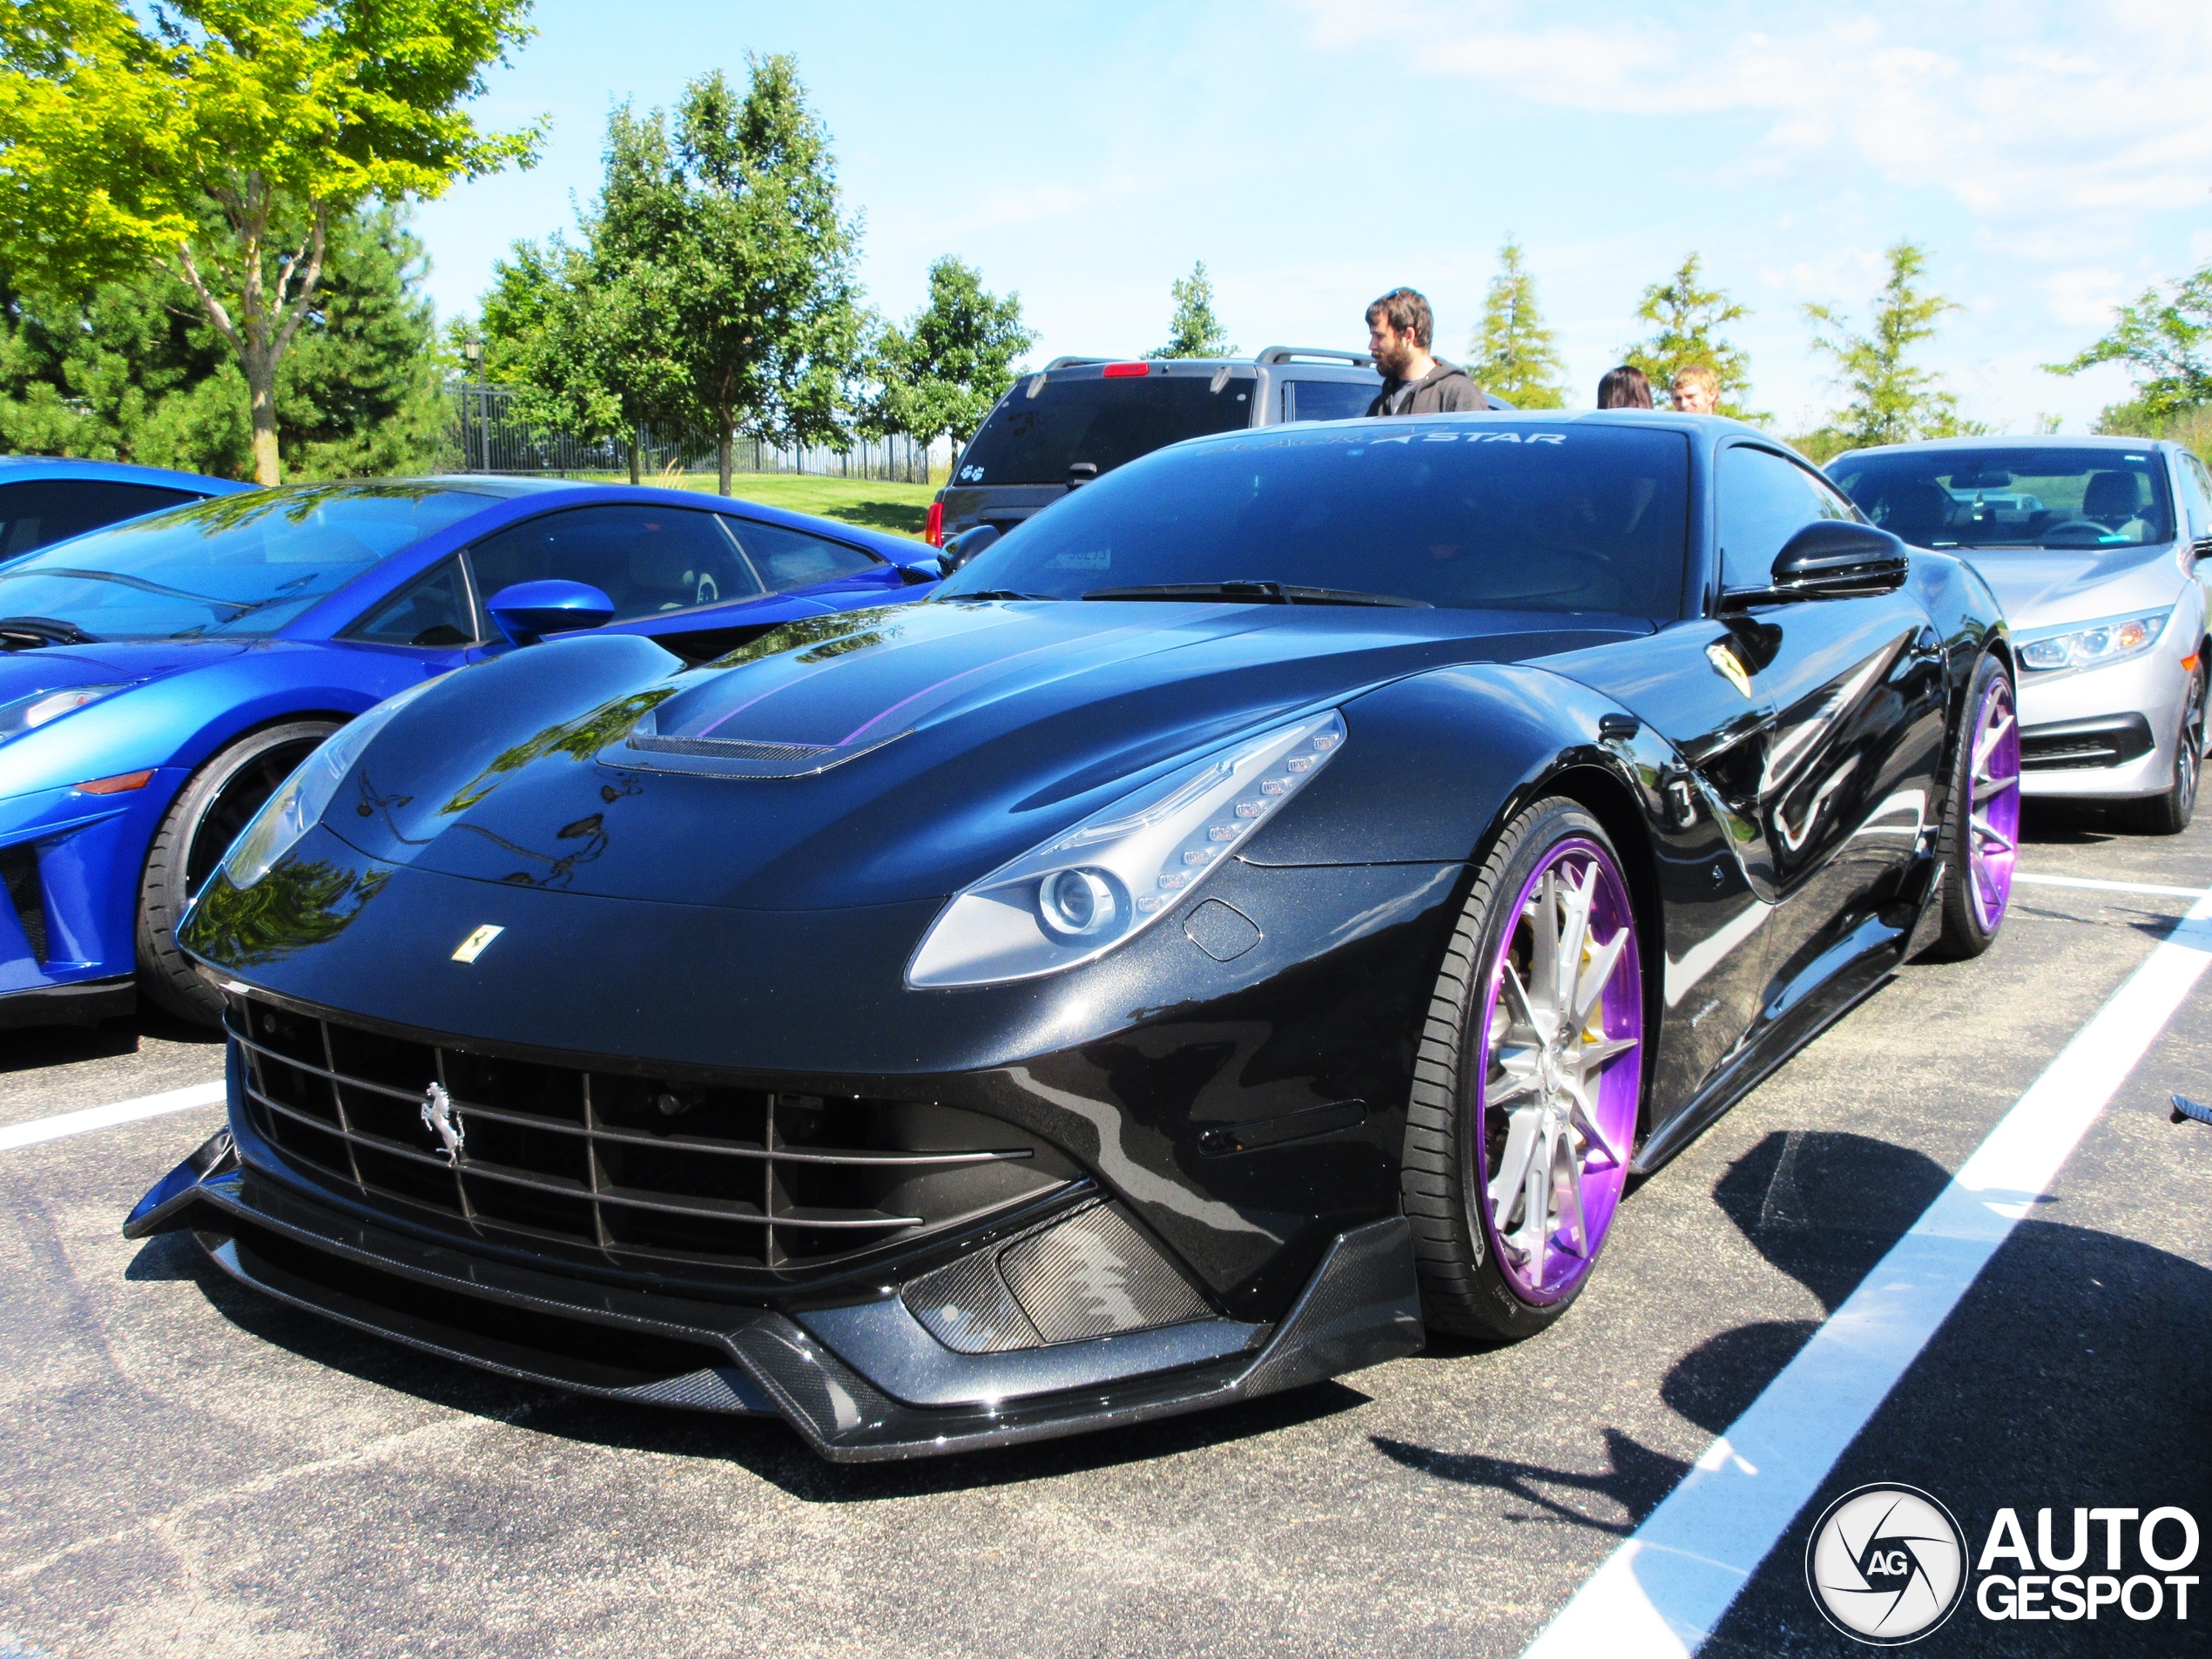 Crazy rims on the F12